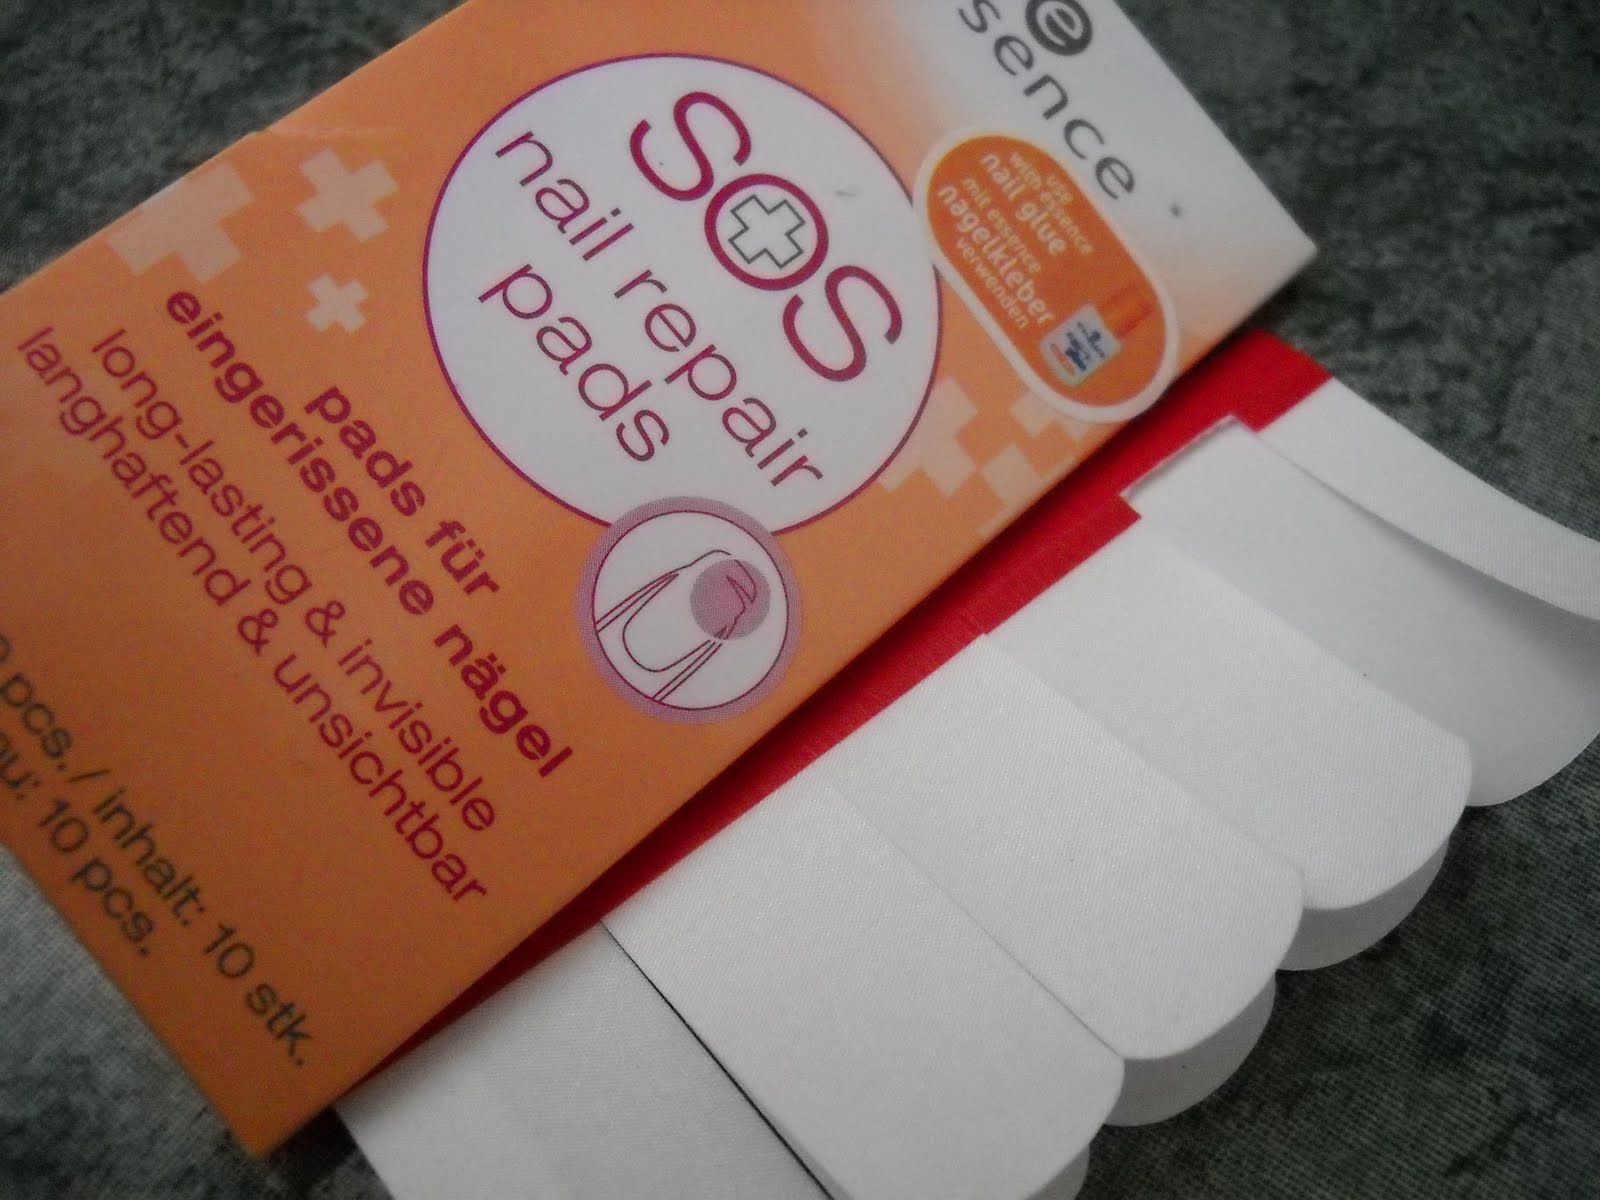 I used the Essence SOS Nail repair pads for the first time this week